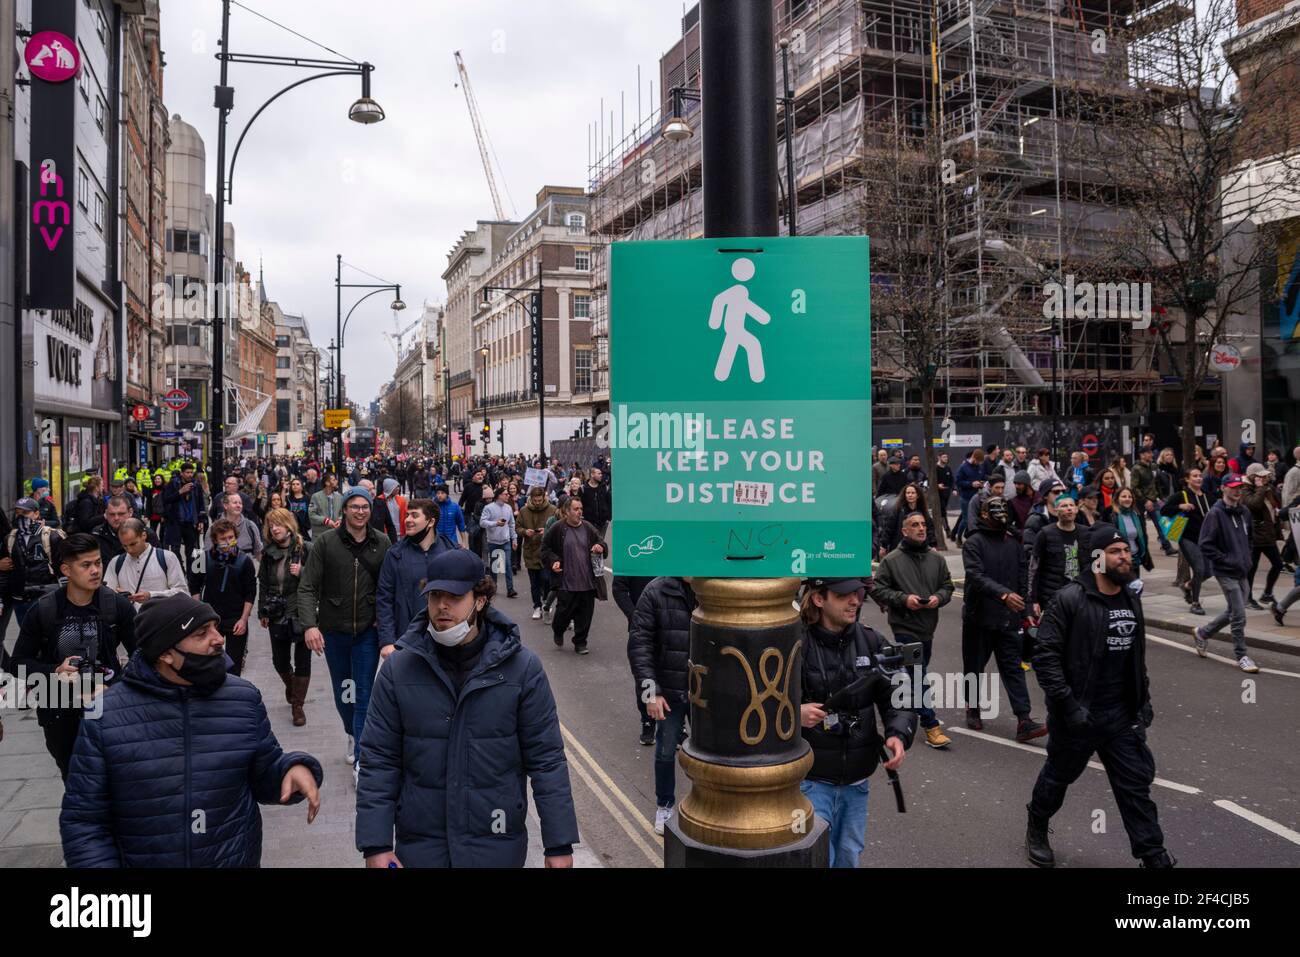 Westminster, London, UK. 20th Mar, 2021. An anti-lockdown protest march is underway in London. Protesters gathered in Hyde Park before marching through the park and heading out, blocking traffic in Park Lane and beyond. Crowd passing along Oxford Street, and social distancing sign Stock Photo